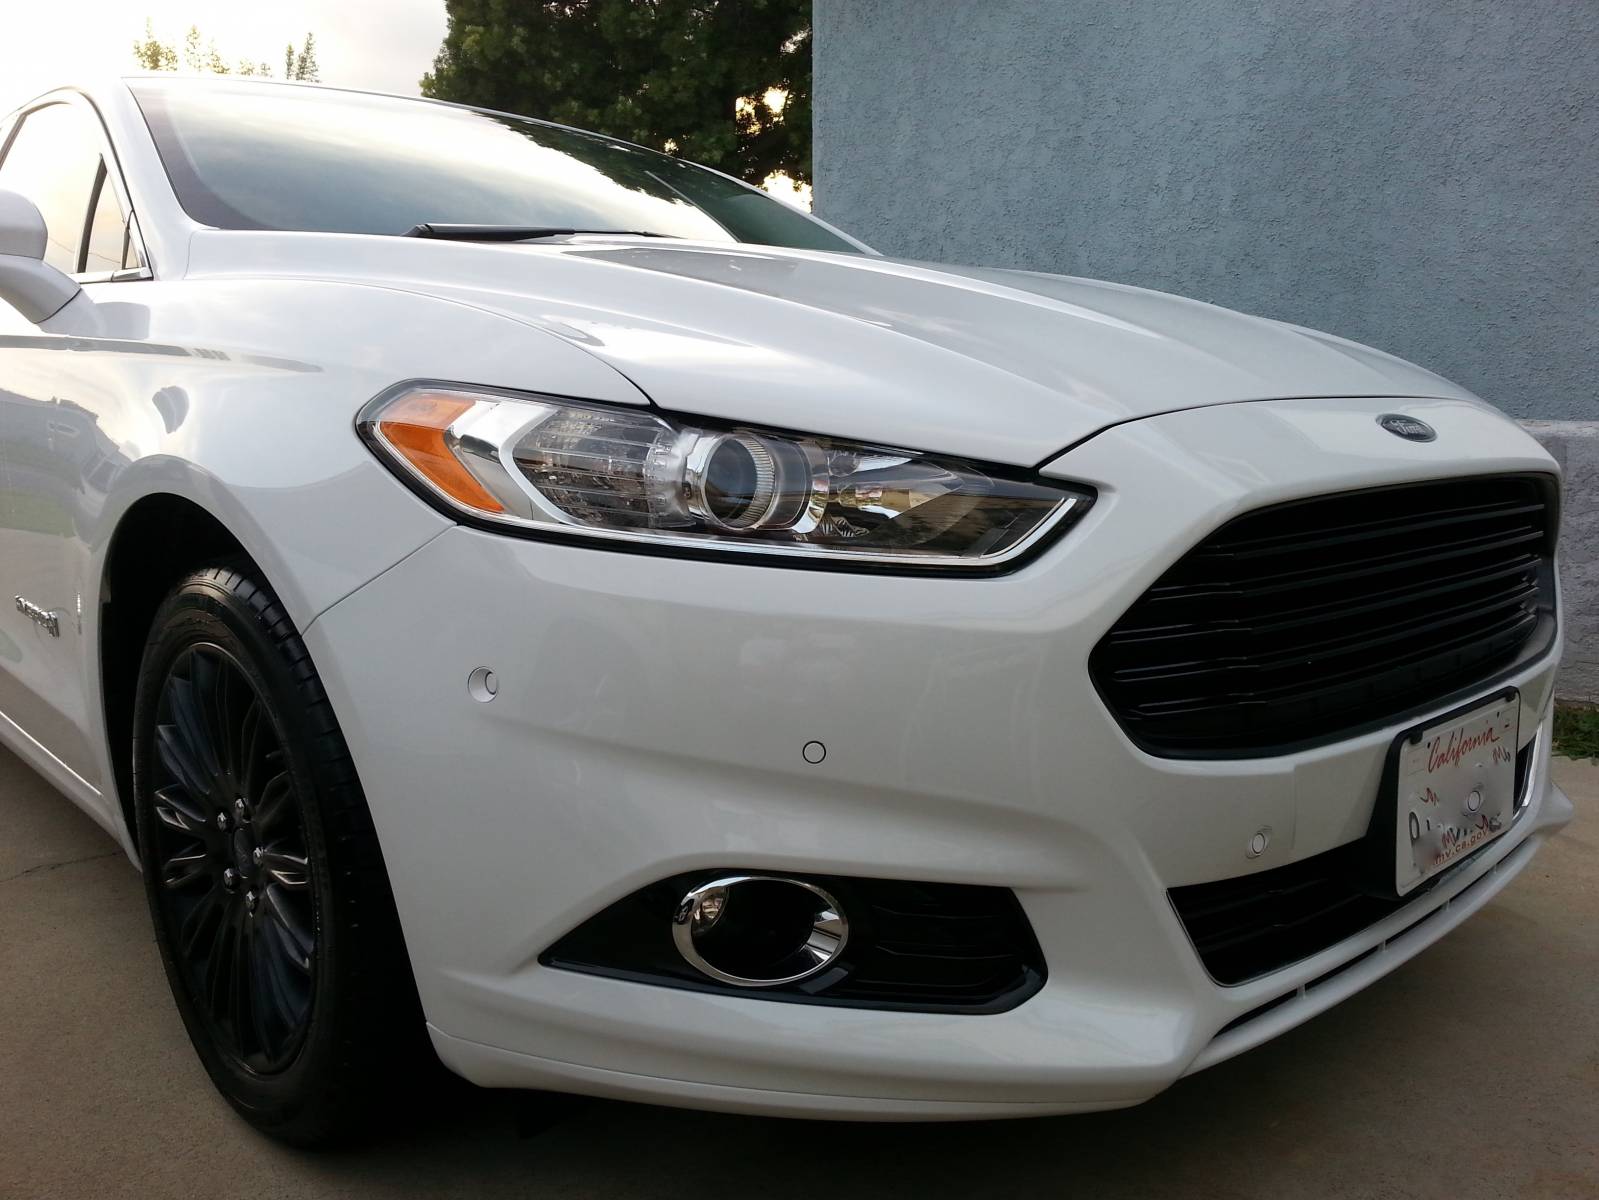 2013 white FFH blacked out grill and wheels